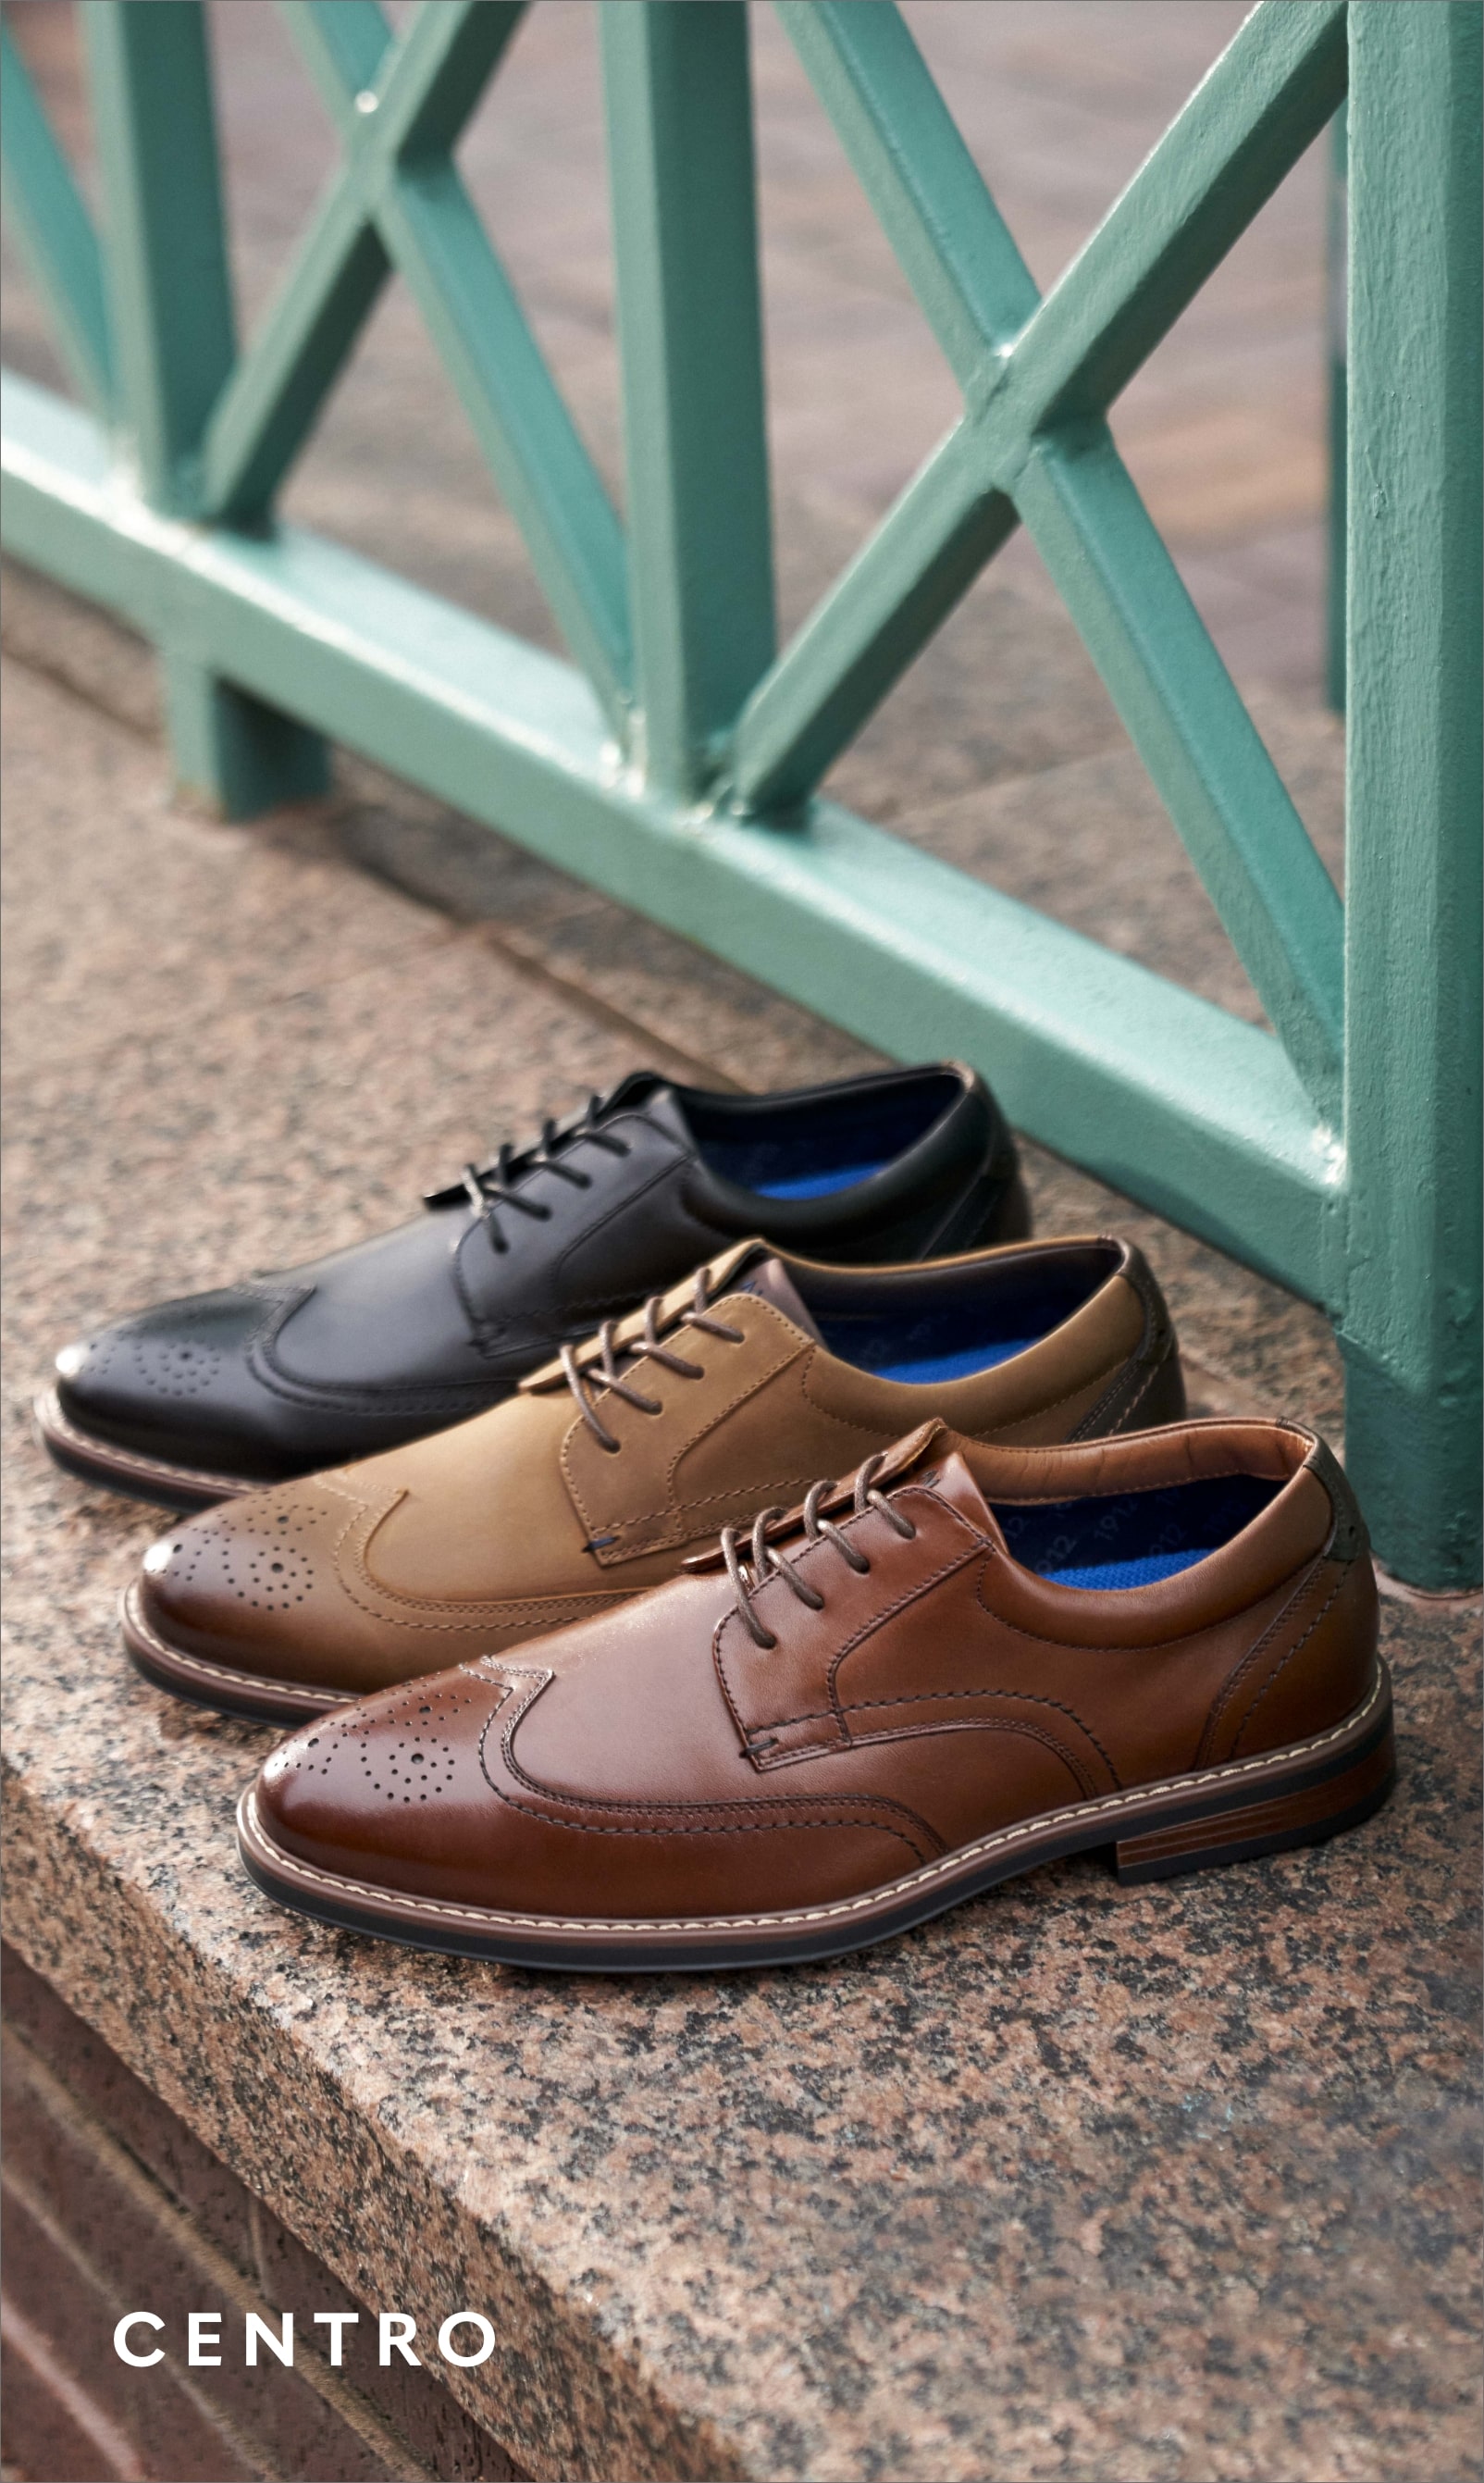 Comfort Styles Image features the Centro Wingtip in all 3 colorways.